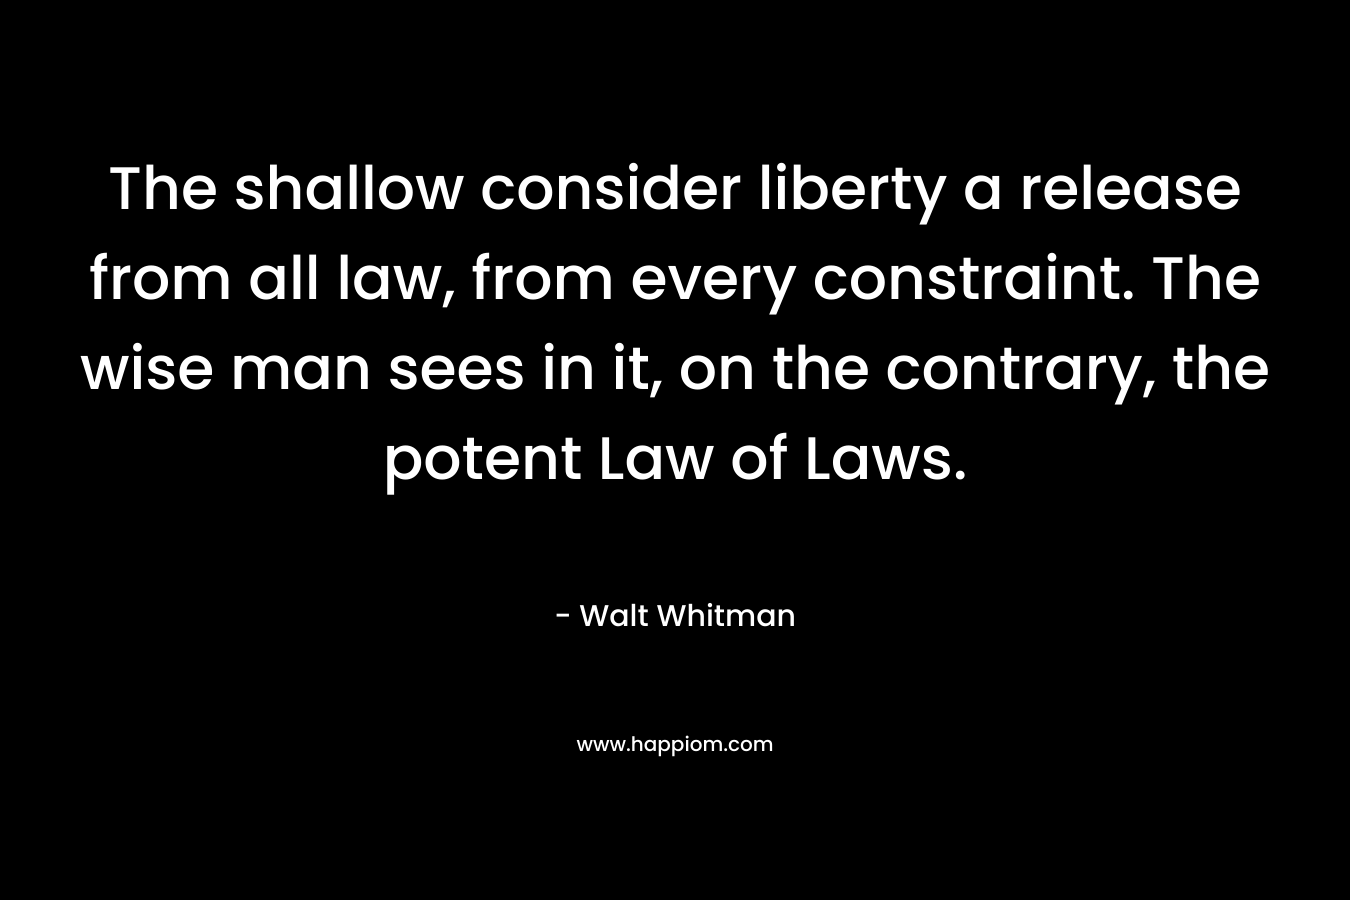 The shallow consider liberty a release from all law, from every constraint. The wise man sees in it, on the contrary, the potent Law of Laws. – Walt Whitman